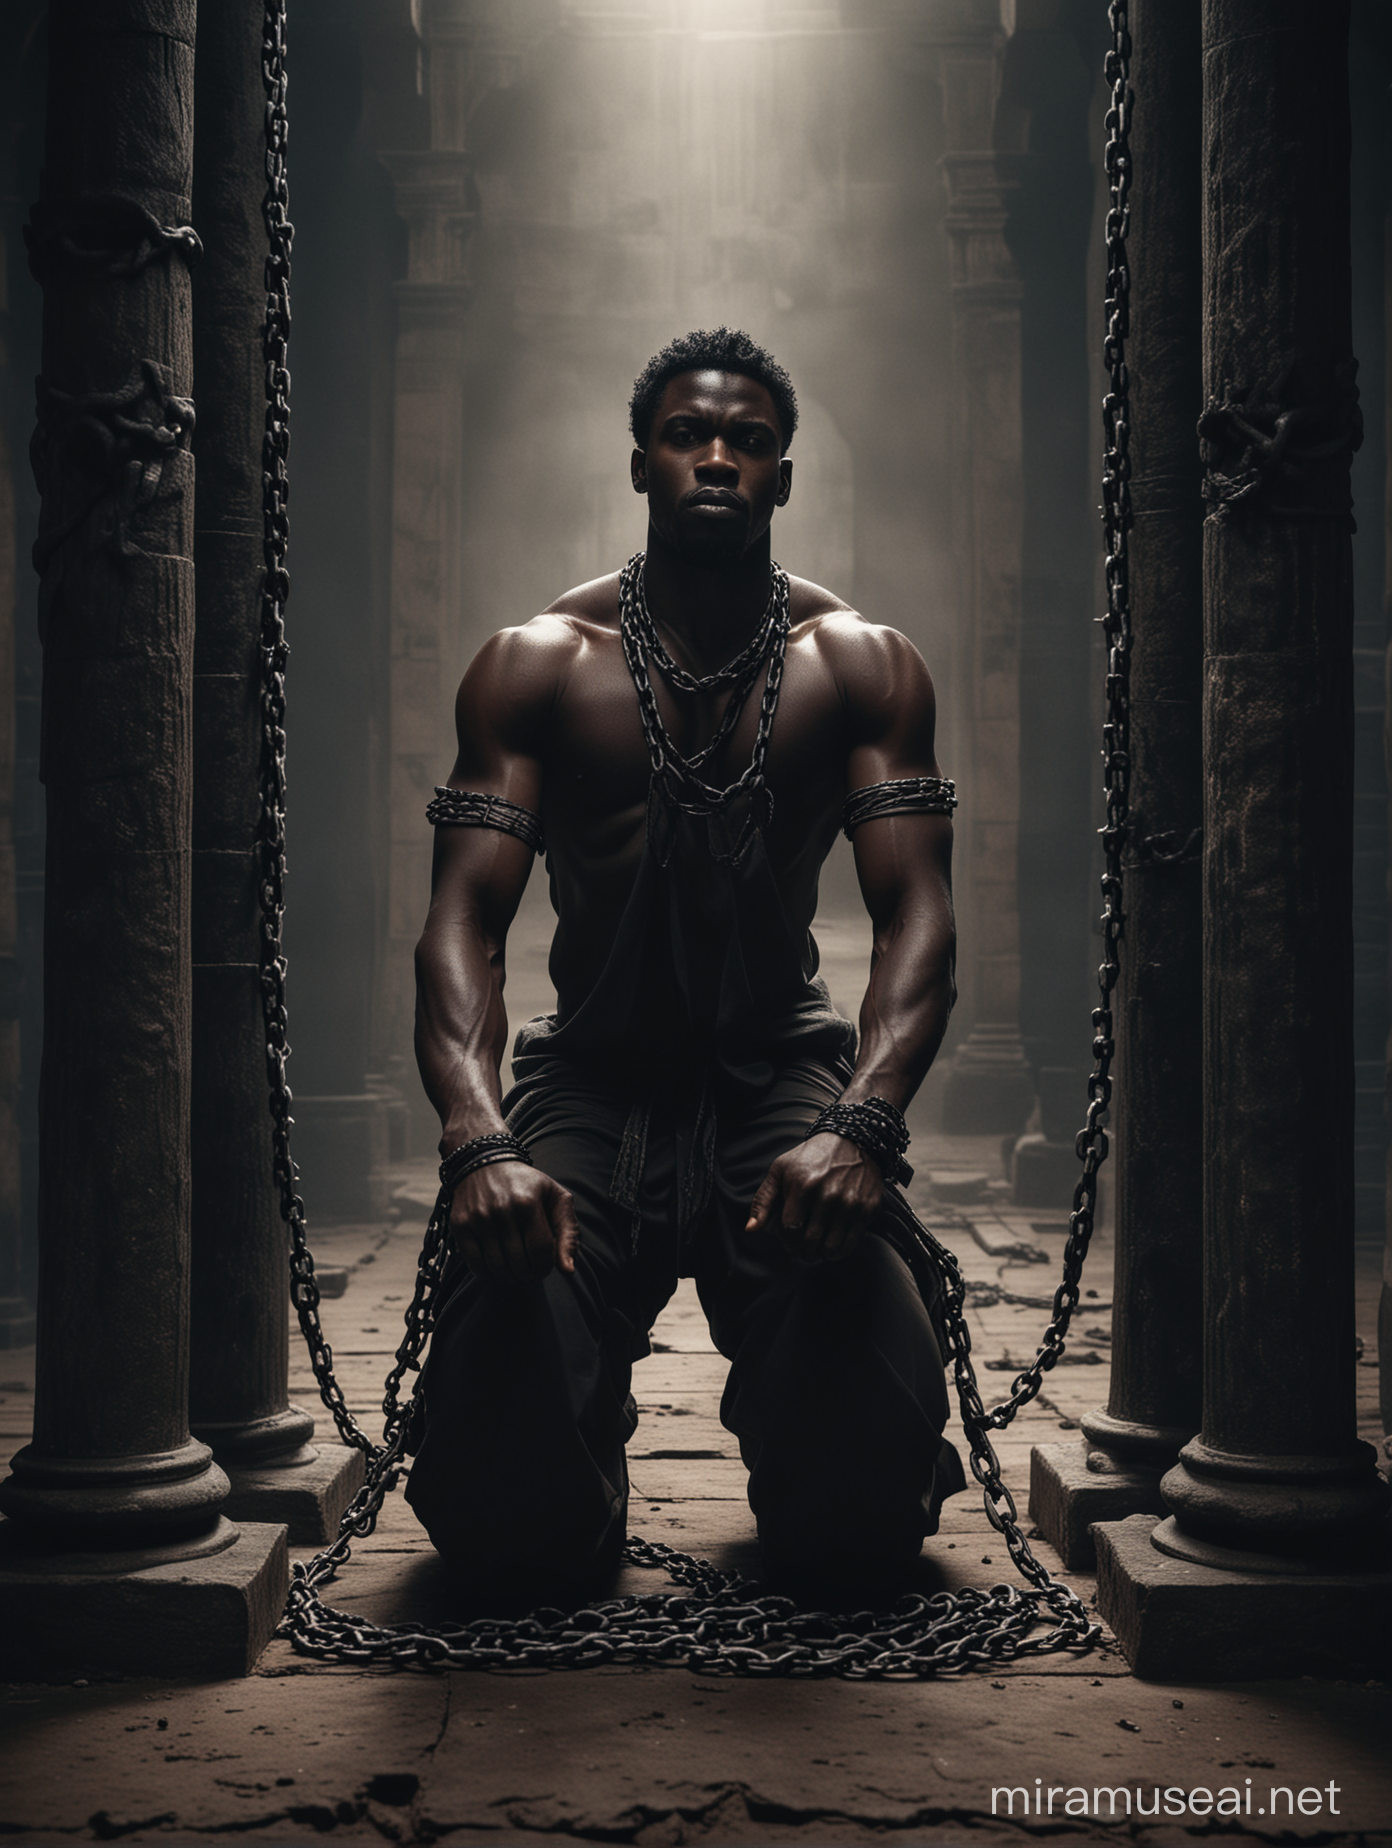  A strong black African man, bounded my chains on both hands against two pillars, kneeling down between two pillars, dark cinematic background